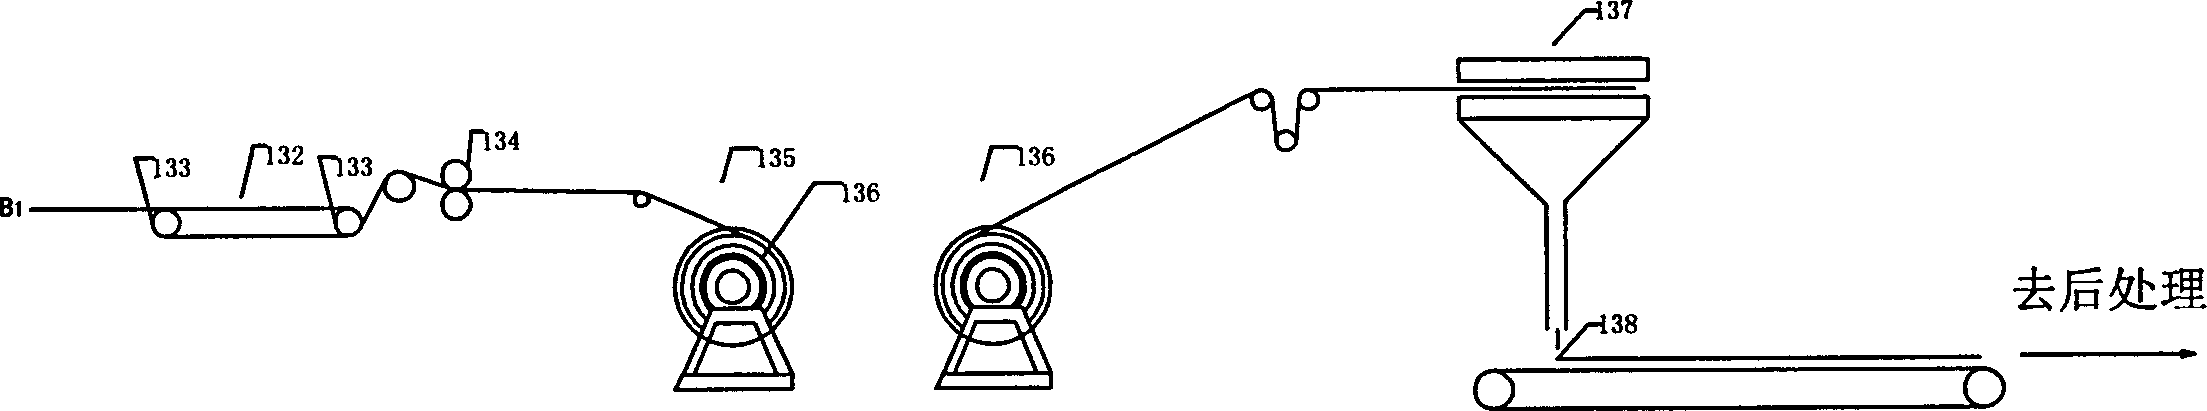 Process and apparatus for manufacturing vinylon filament